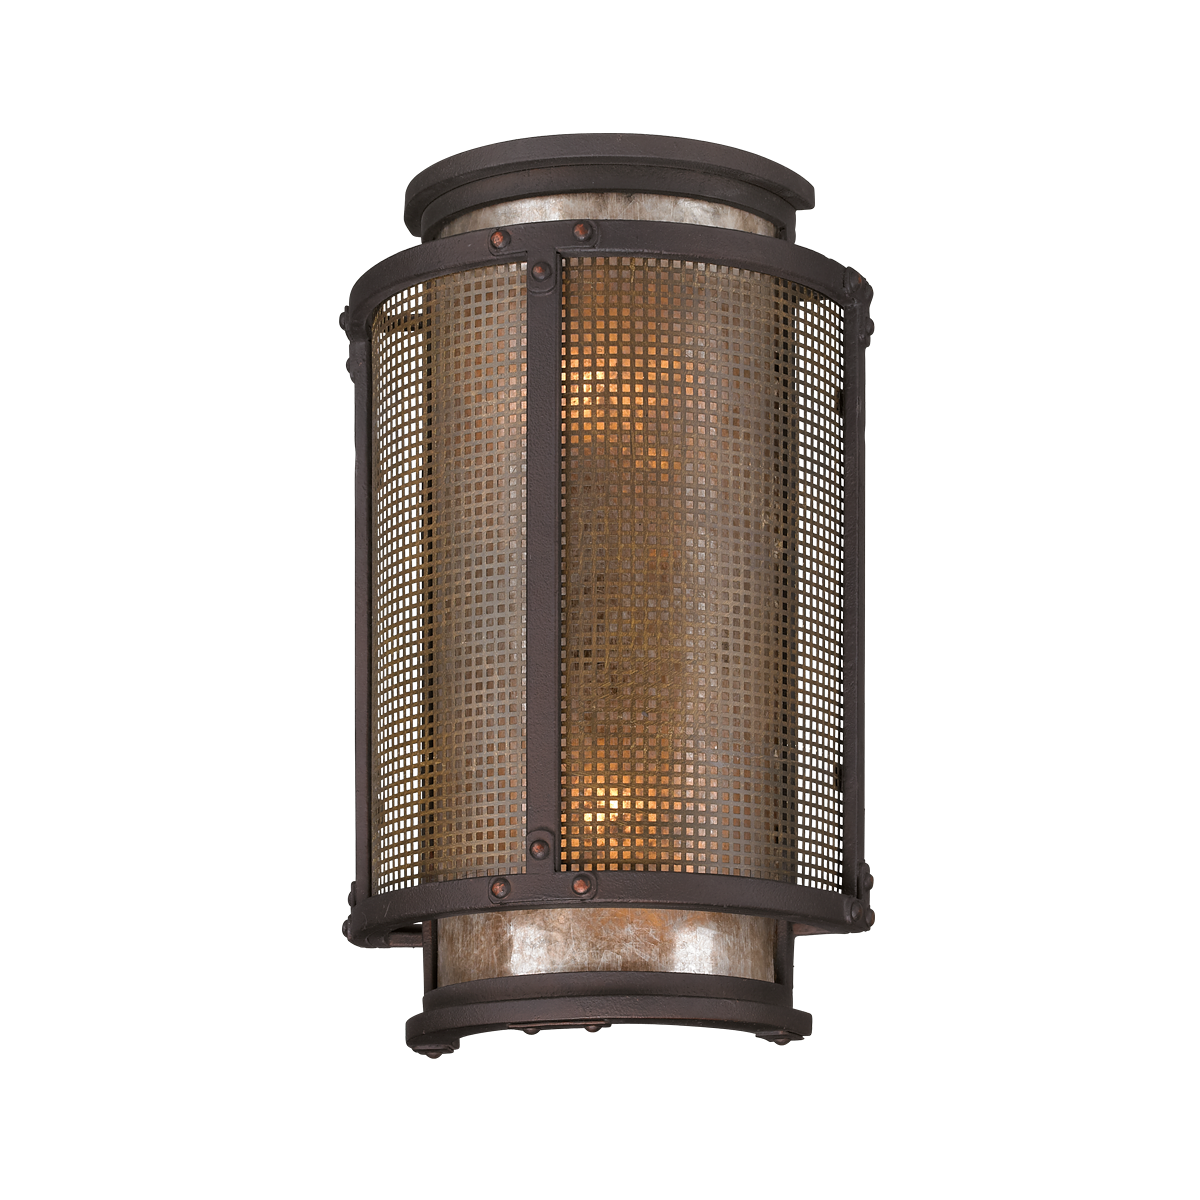 Troy Lighting Copper Mountain Wall Sconce Wall Sconce Troy Lighting Bronze 8.75x8.75x14.25 